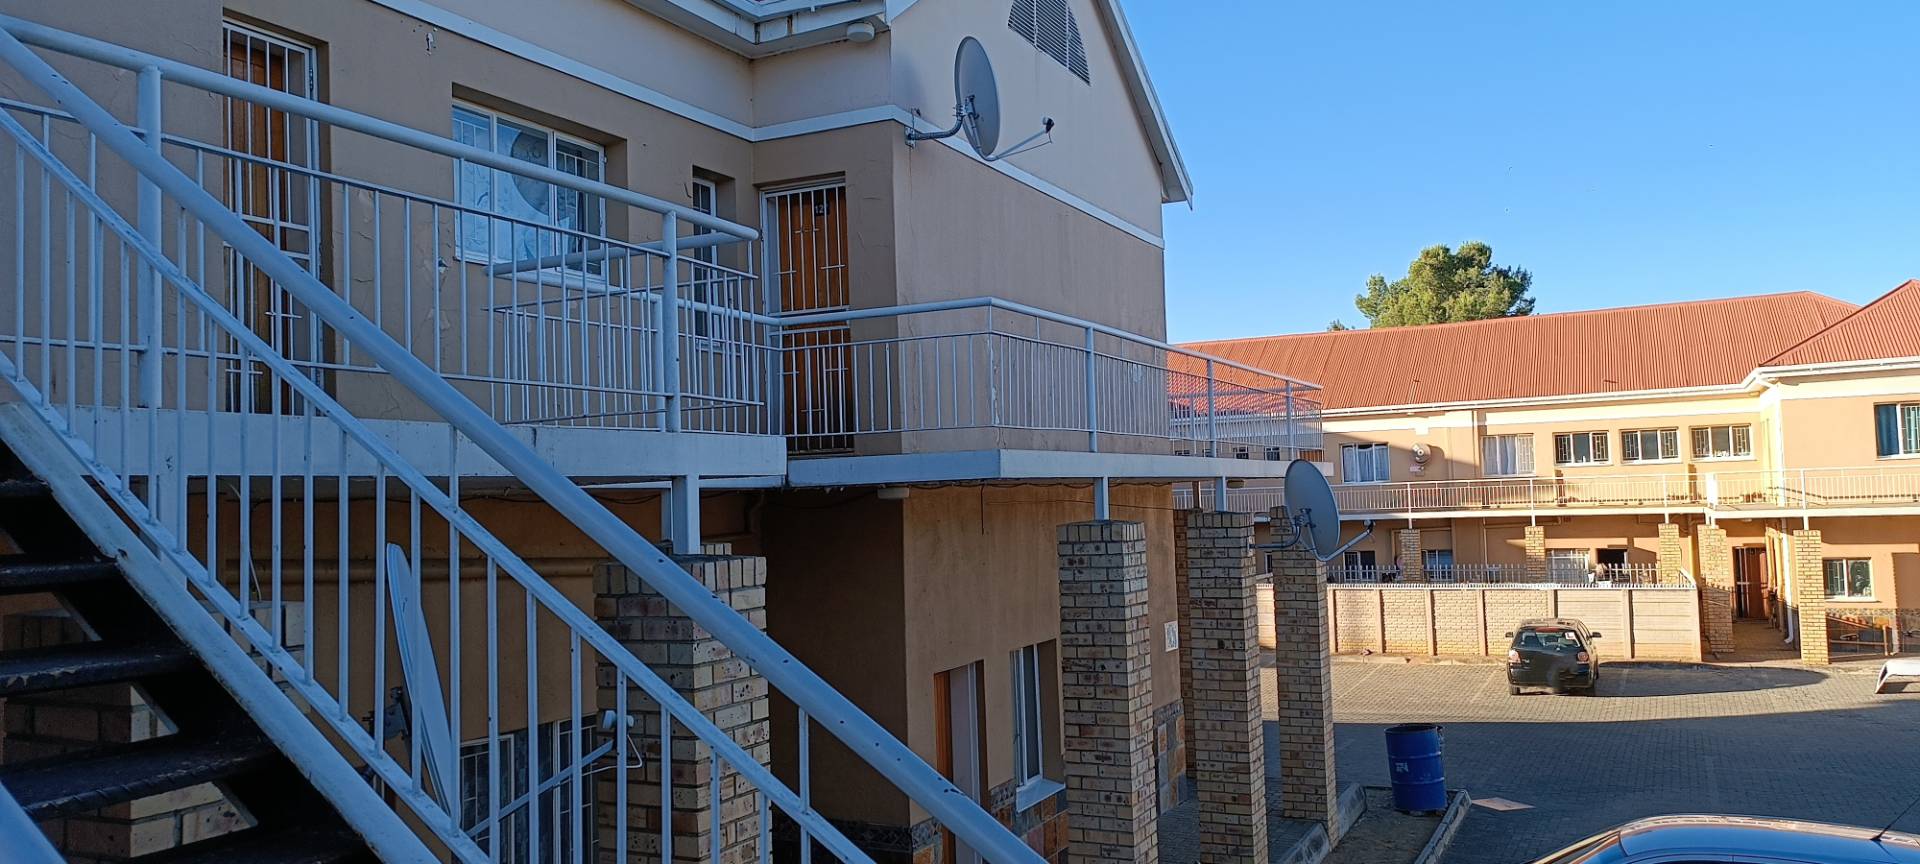 1 Bedroom Property for Sale in Willows Free State